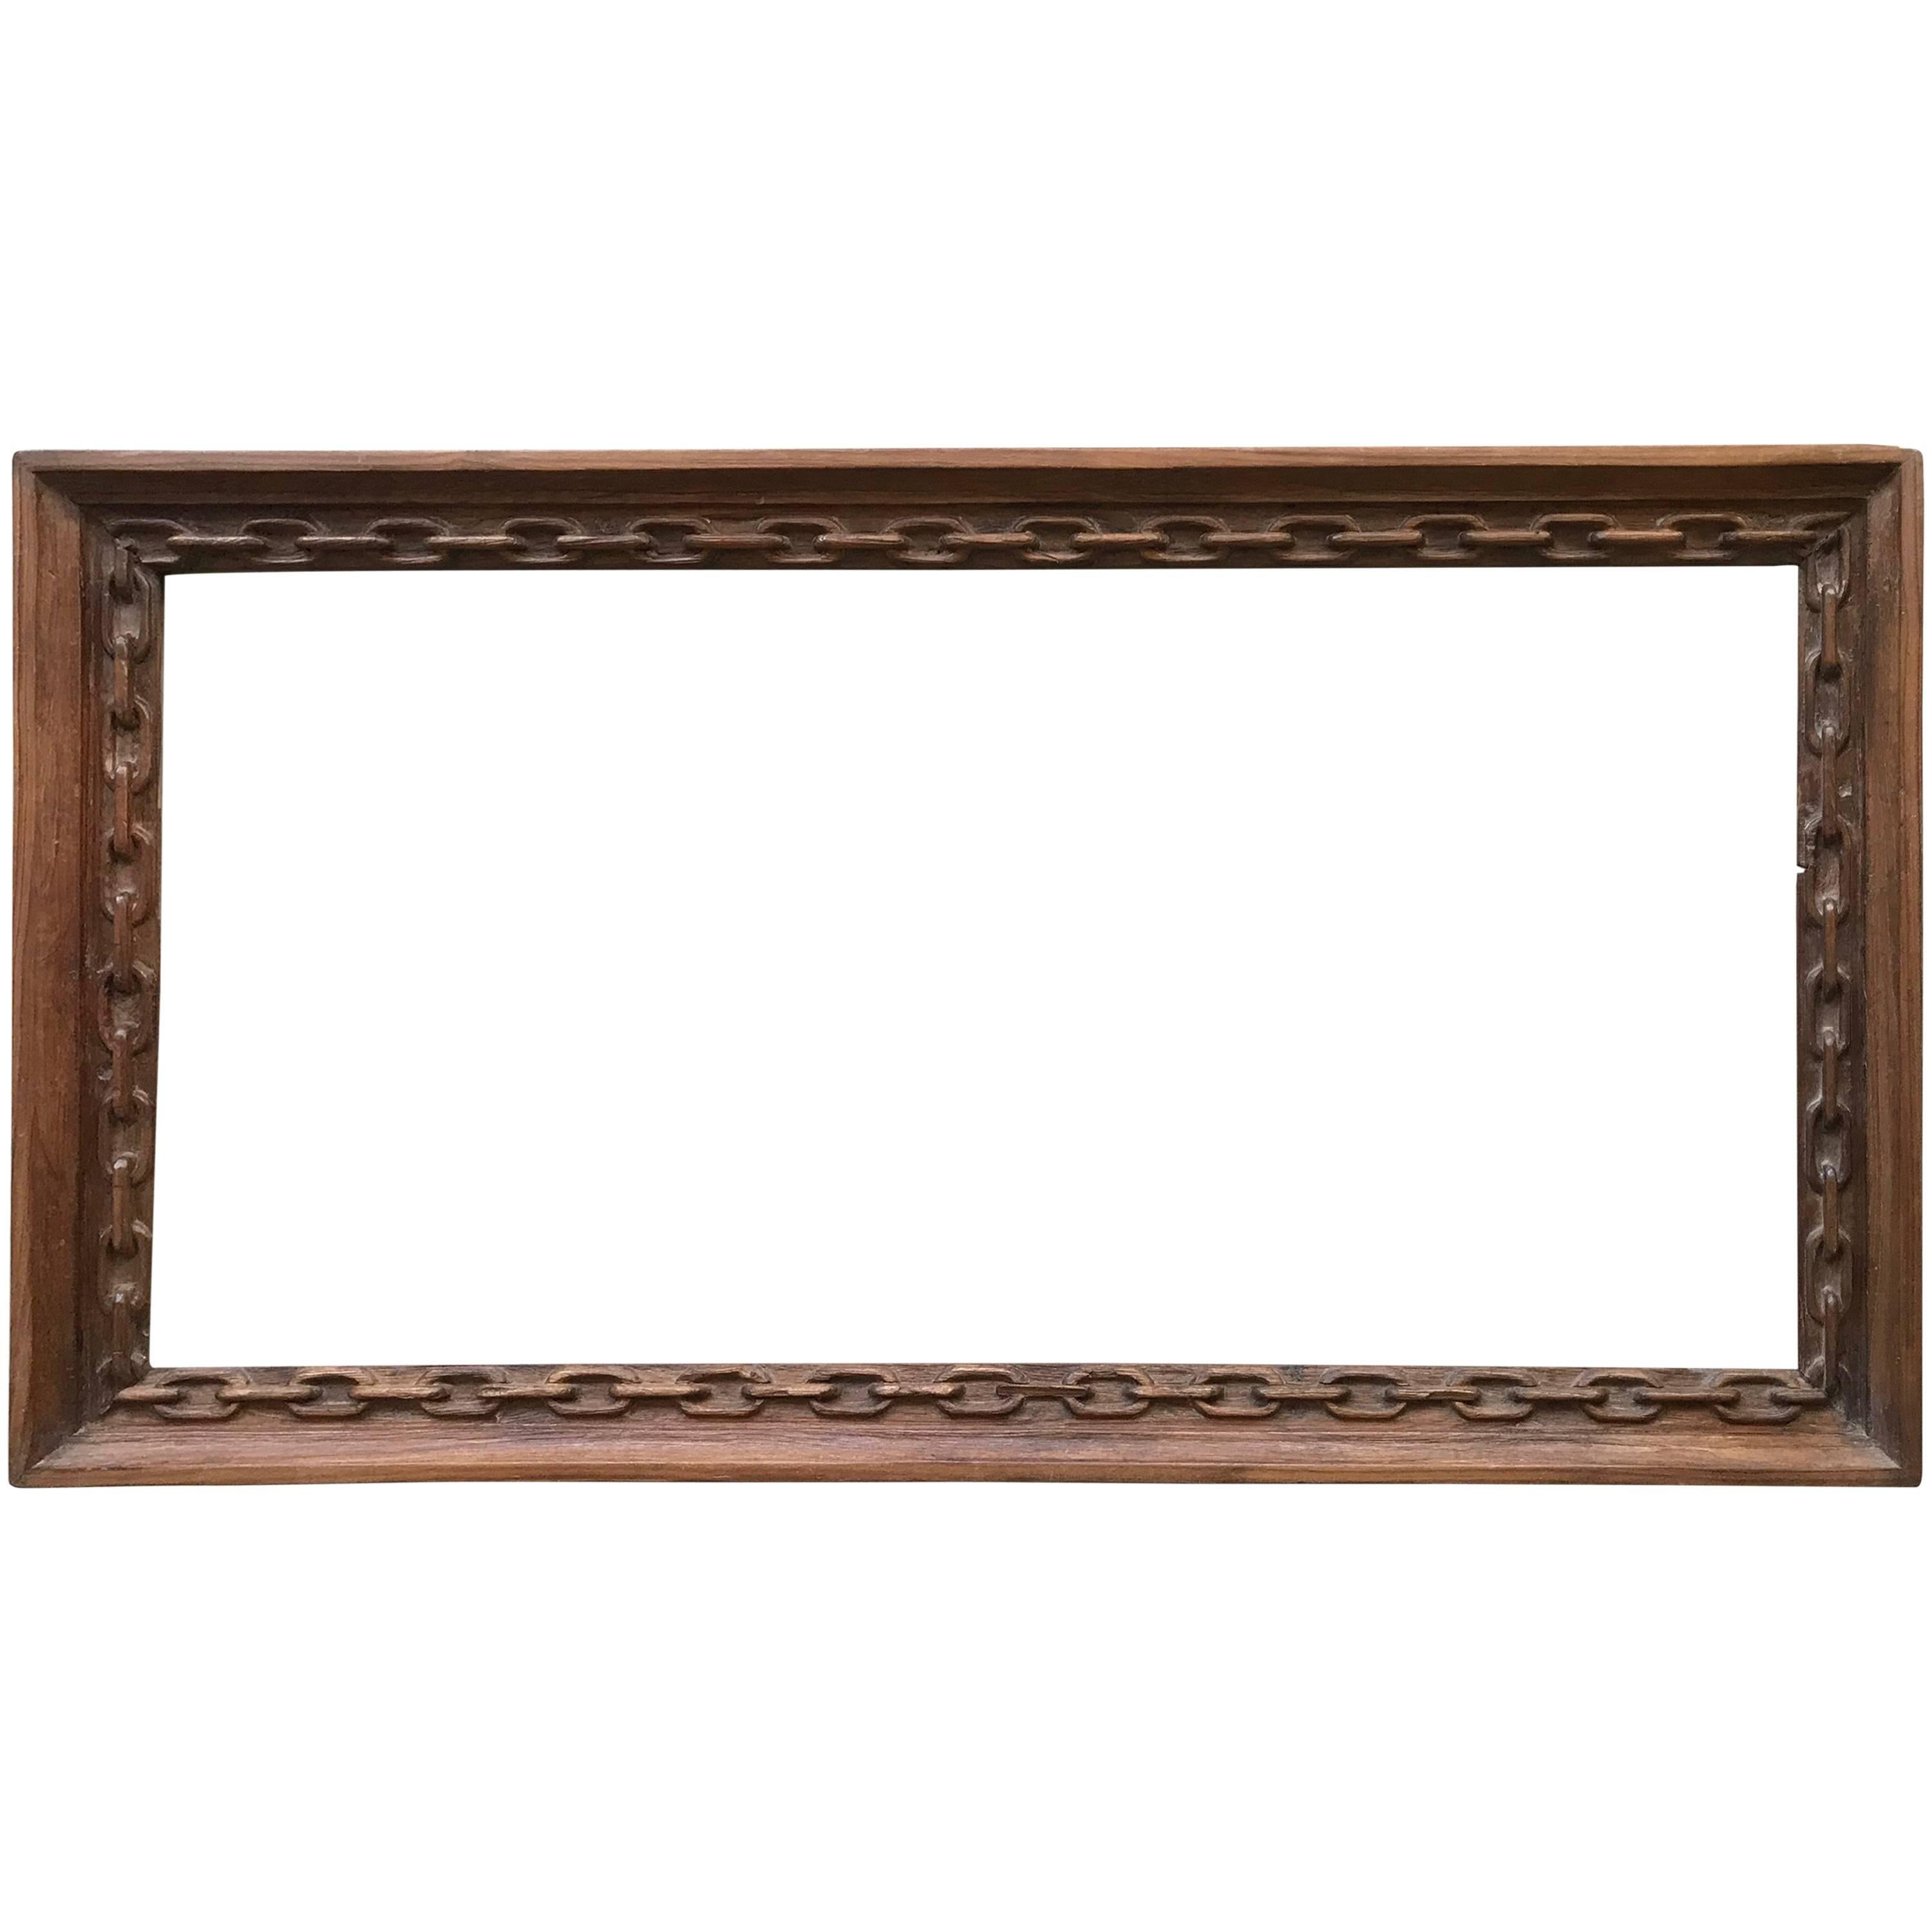 Rare Arts and Crafts Carved Chain Motif Picture or Mirror Frame of Teak Wood